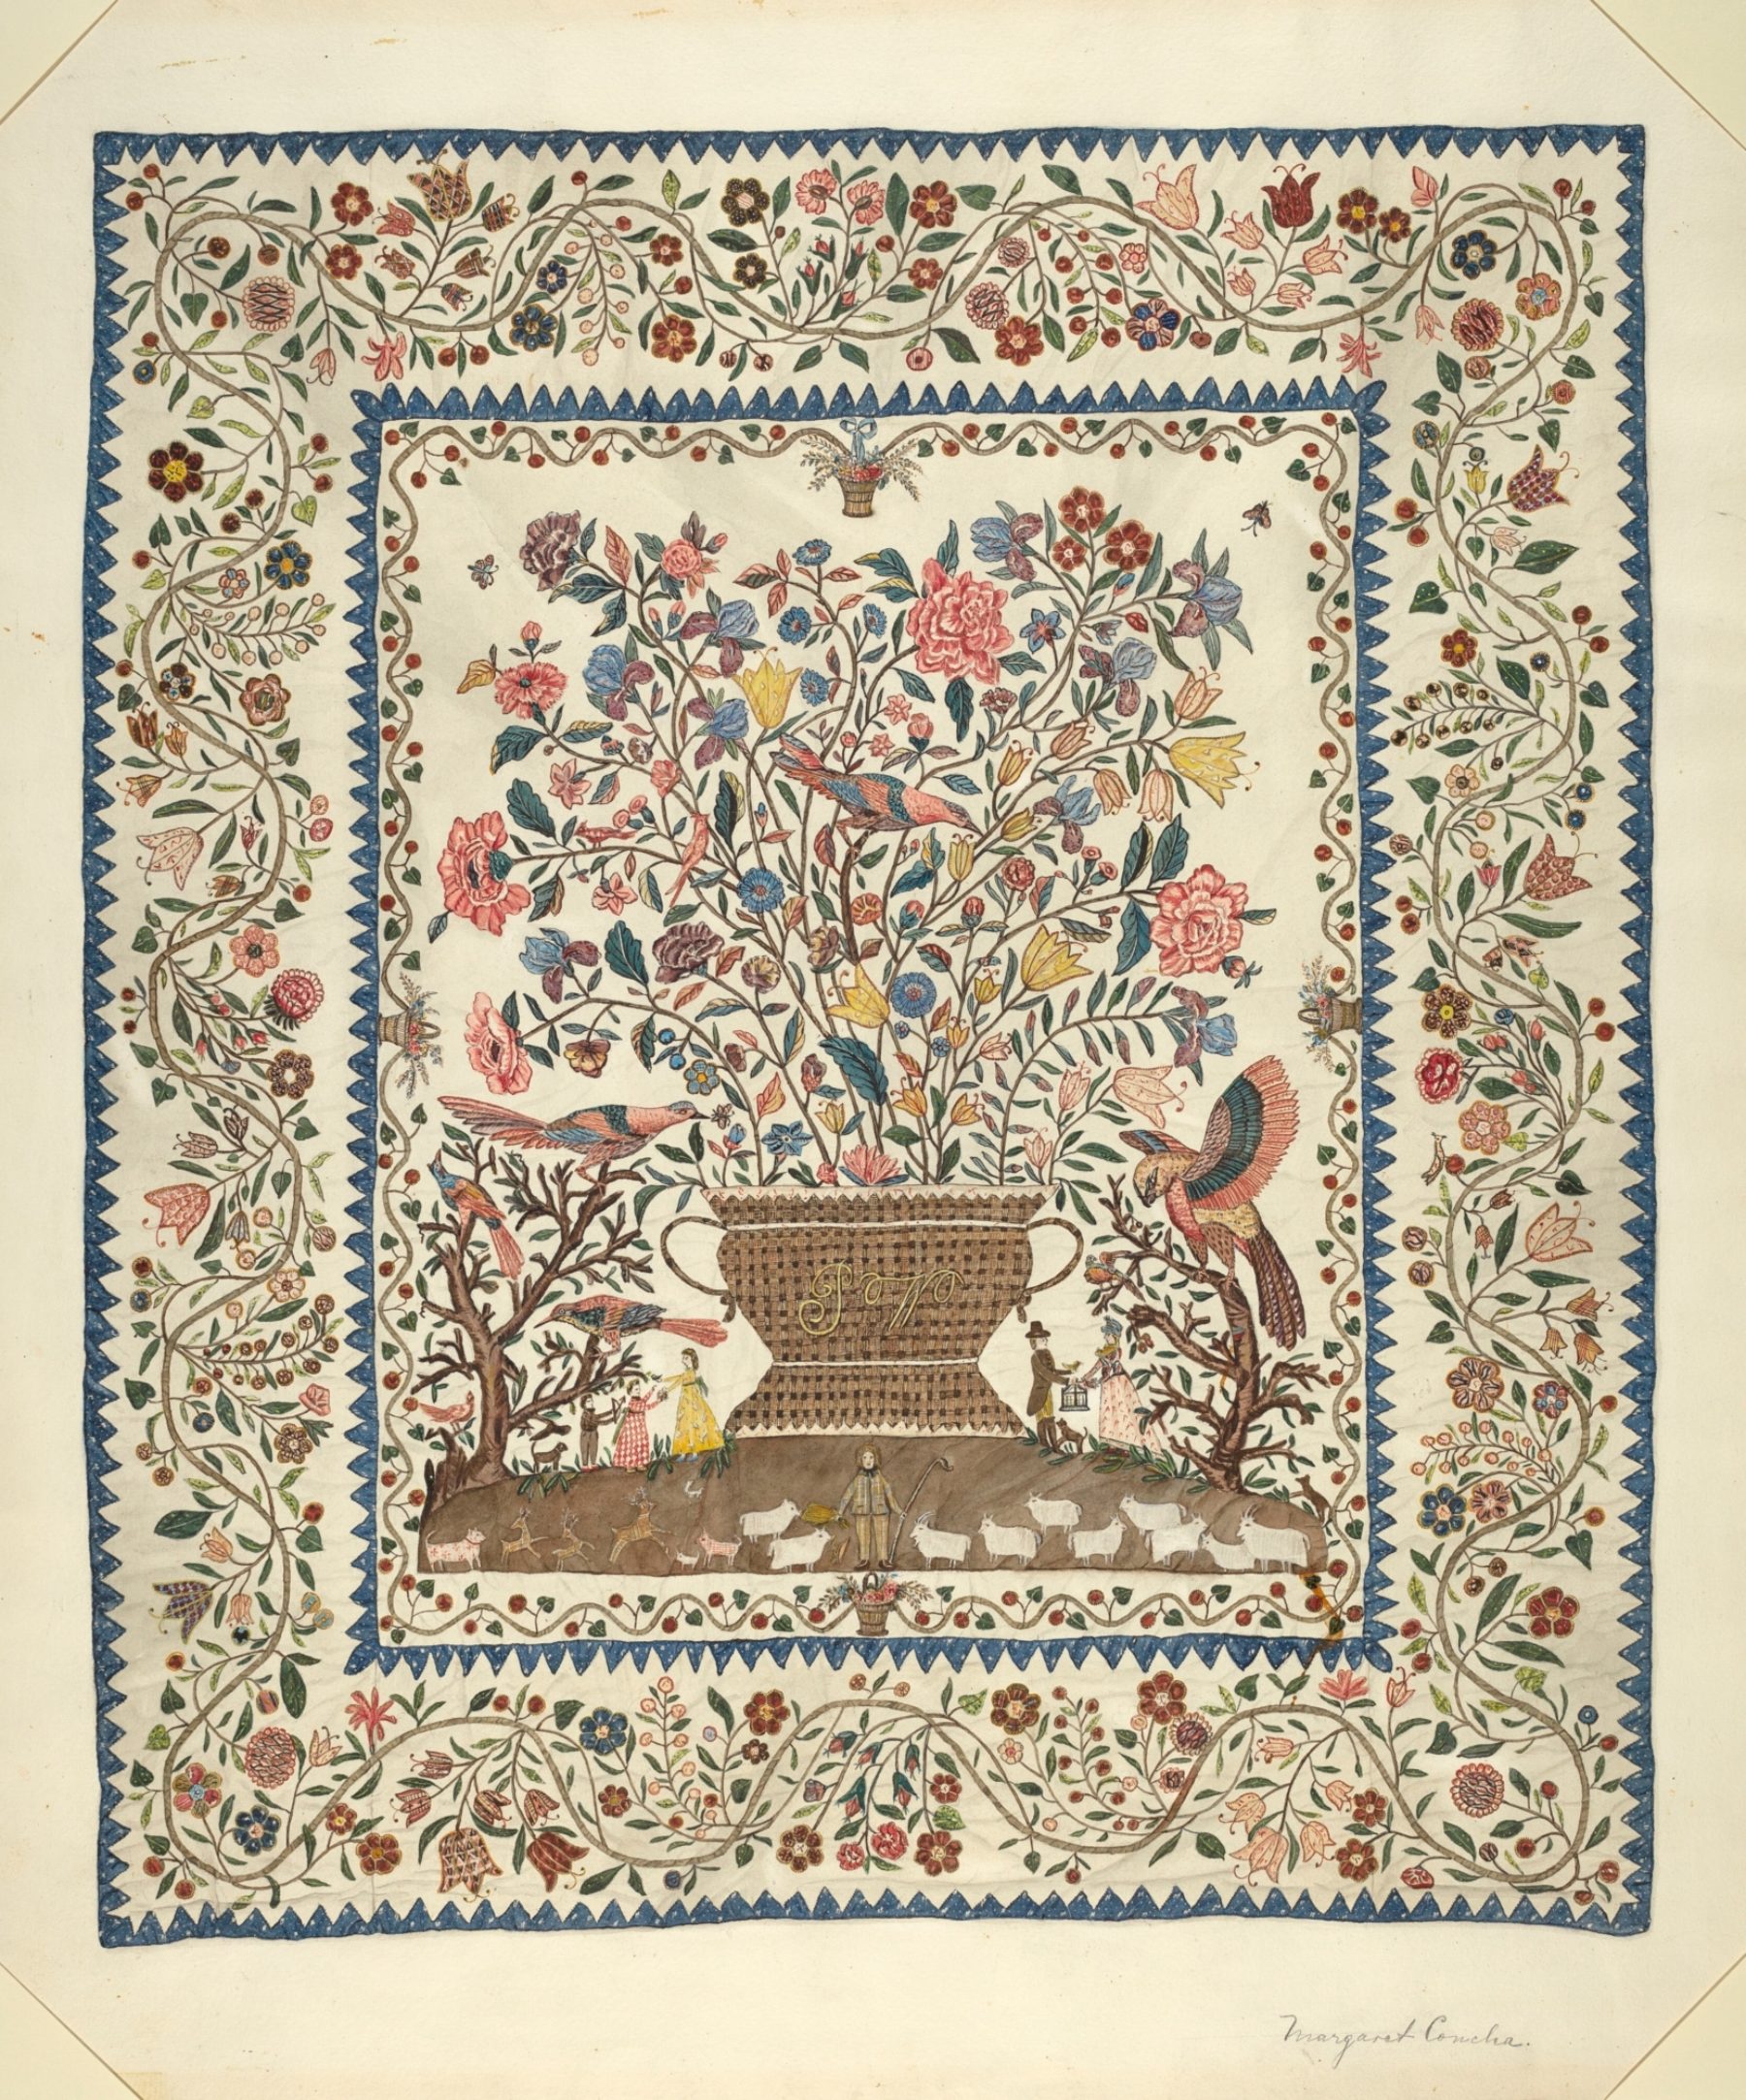 Margaret Concha, Applique and Embroidered Coverlet, 1943. Watercolor, graphite, and pen and ink on paper. 23 7/16 x 19 13/16 inches (59.5 x 50.4 cm). Courtesy National Gallery of Art